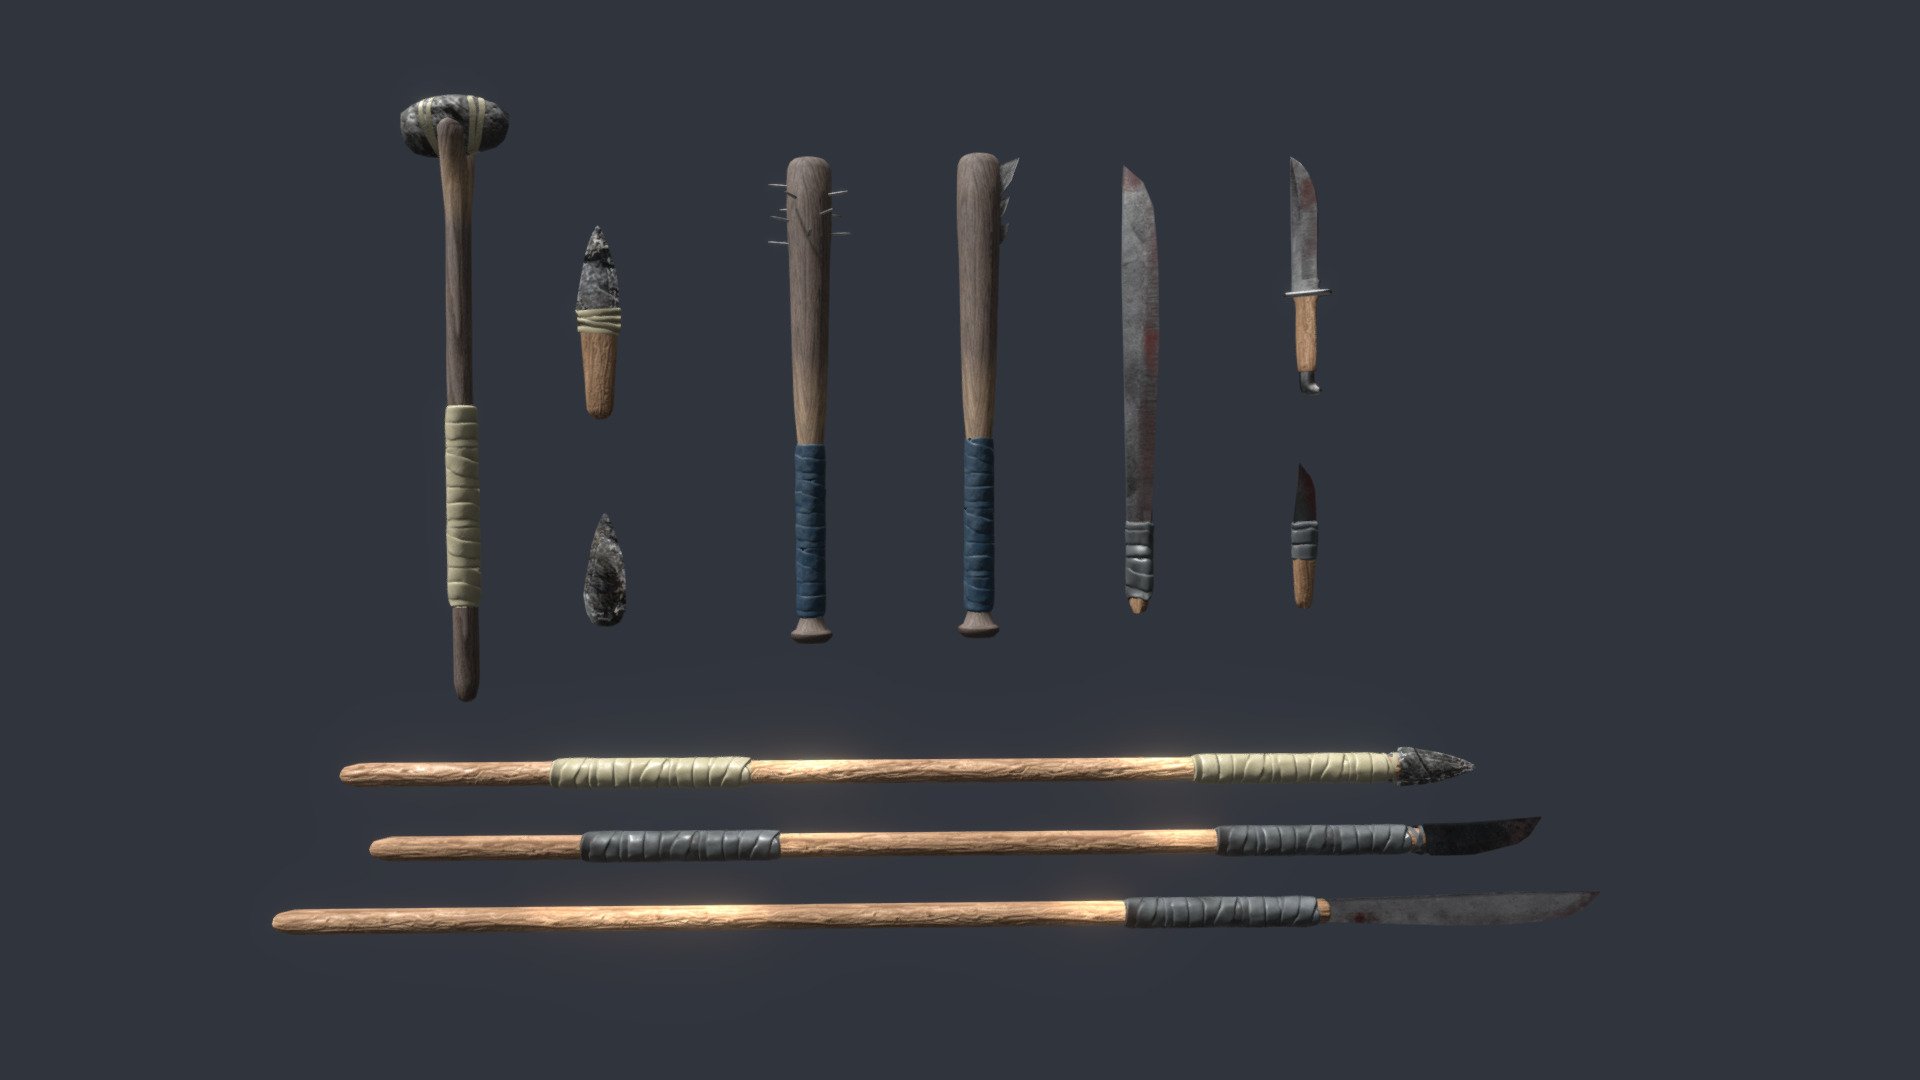 Crafted from natural and artificial materials, these makeshift weapons are suitable for survival games in modern or natural environments.

Read more about the Improvised Weapons series here: 
https://runemarkstudio.com/unity-assets/improvised-weapons/ - Improvised Melee Weapons - Buy Royalty Free 3D model by RunemarkStudio 3d model